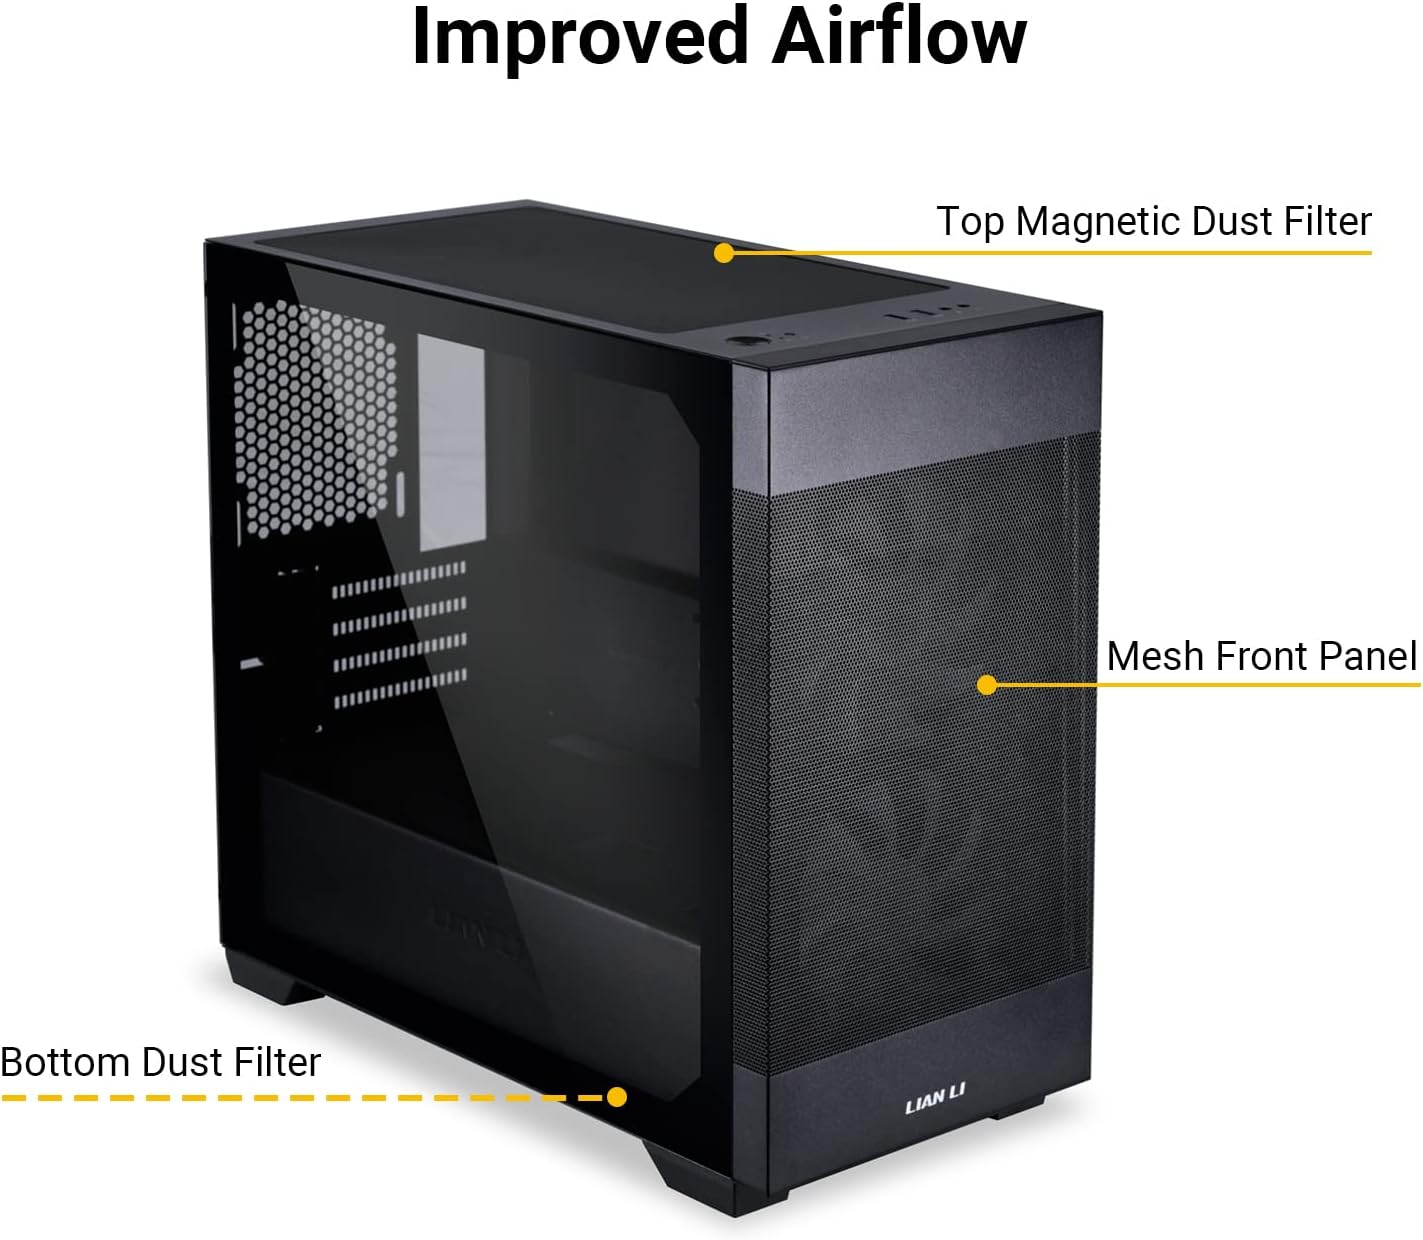 LIAN LI High Airflow ATX PC Case, RGB Gaming Computer Case, Mesh Front Panel Mid-Tower Chassis w/ 3 ARGB PWM Fans Pre-Installed, USB Type-C Port, Tempered Glass Side Panel (LANCOOL 205 MESH C, Black)